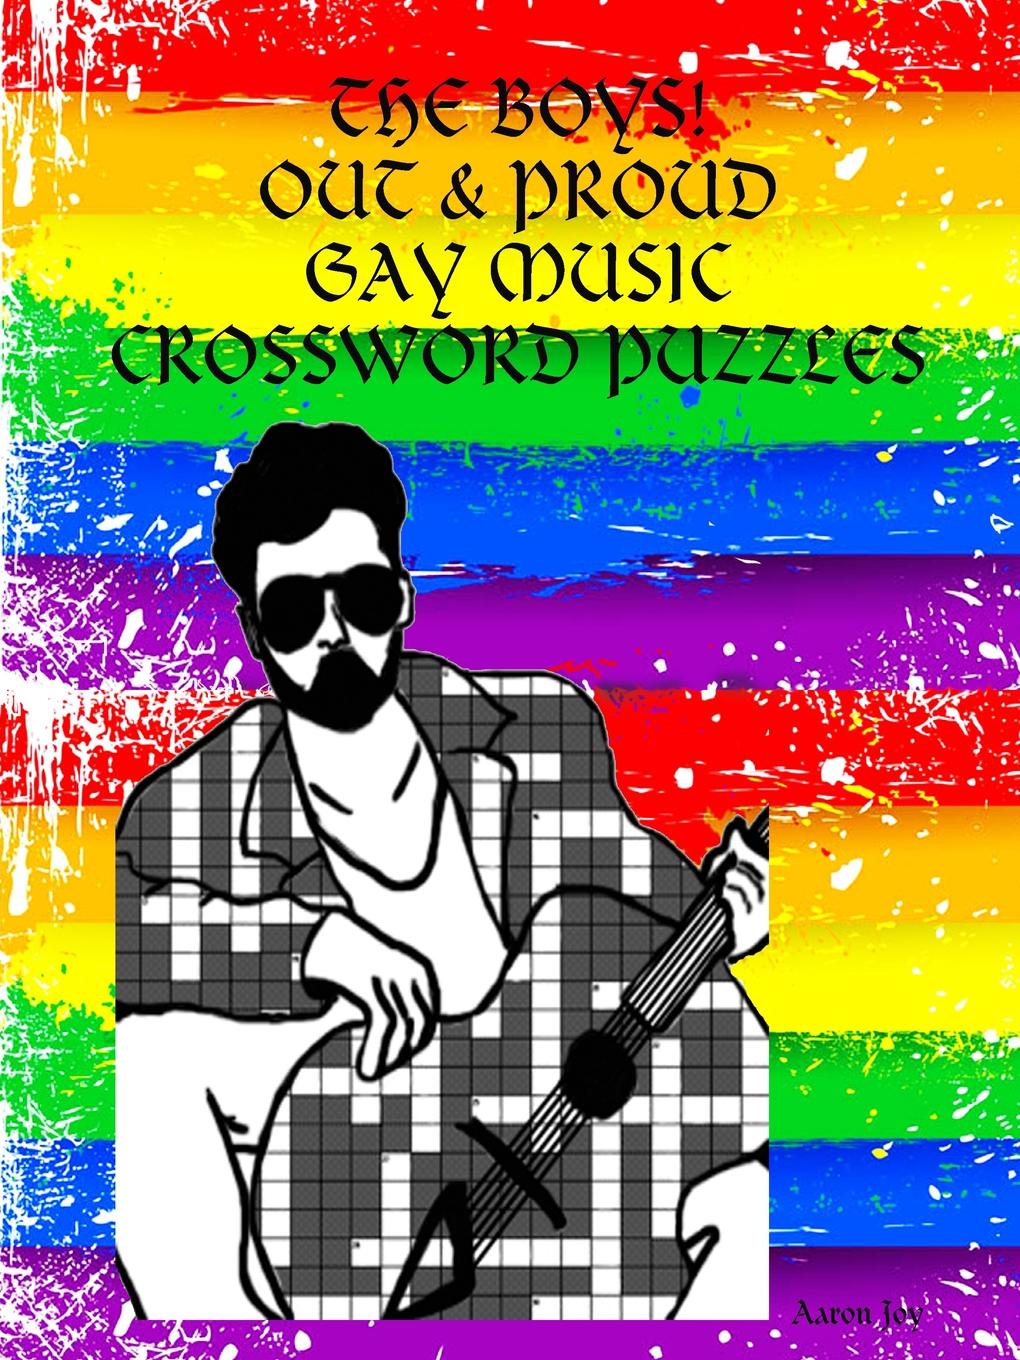 THE BOYS. OUT . PROUD GAY MUSIC CROSSWORD PUZZLES